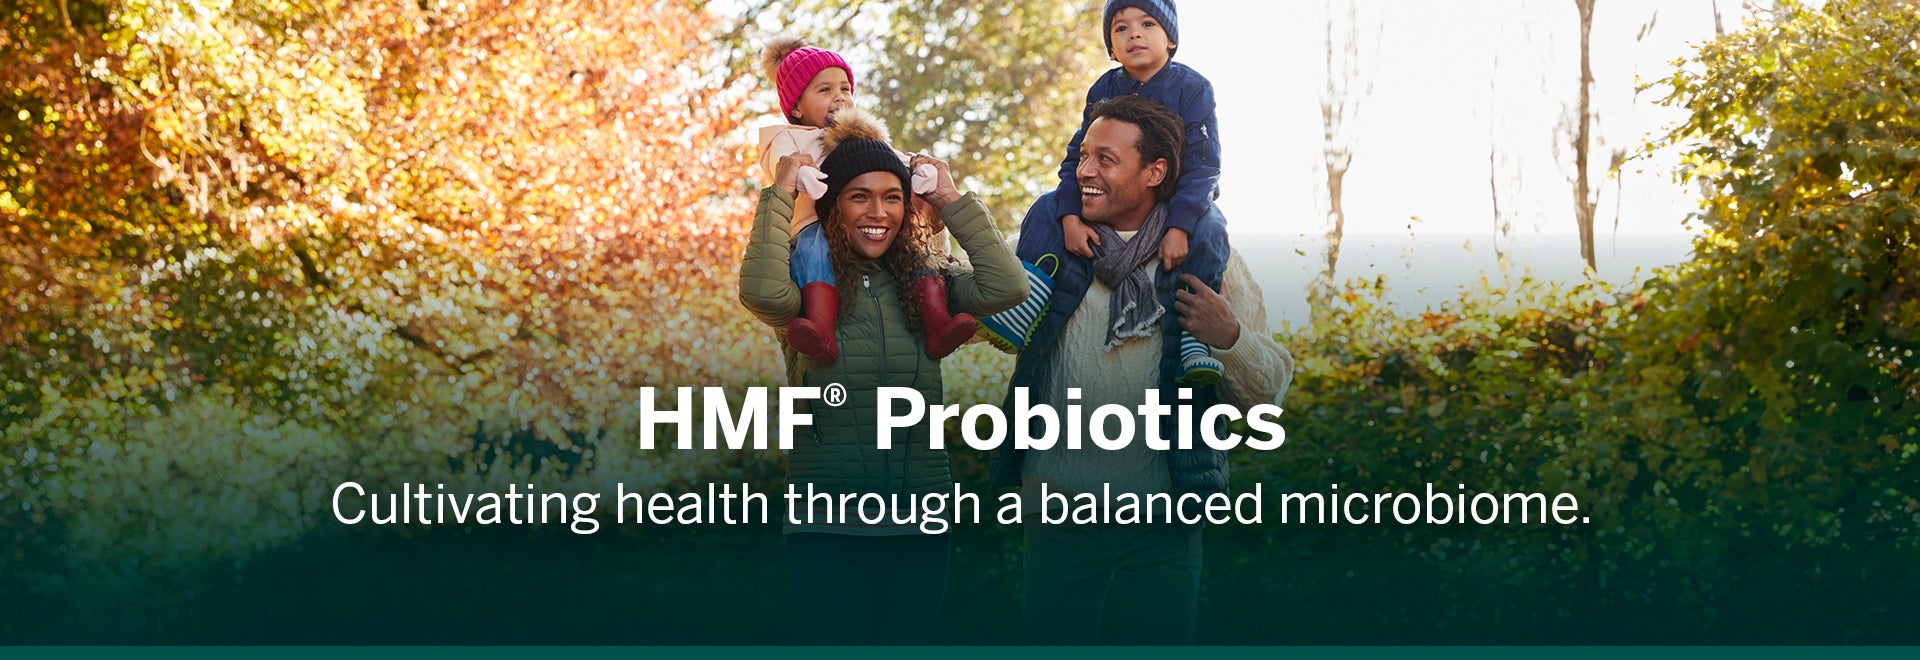 Family walking outside and smailing and launghing. The husband and wife are holding both kids on their shoulders and text says HMF Probiotics cultivitaing health through a balanced microbiome.